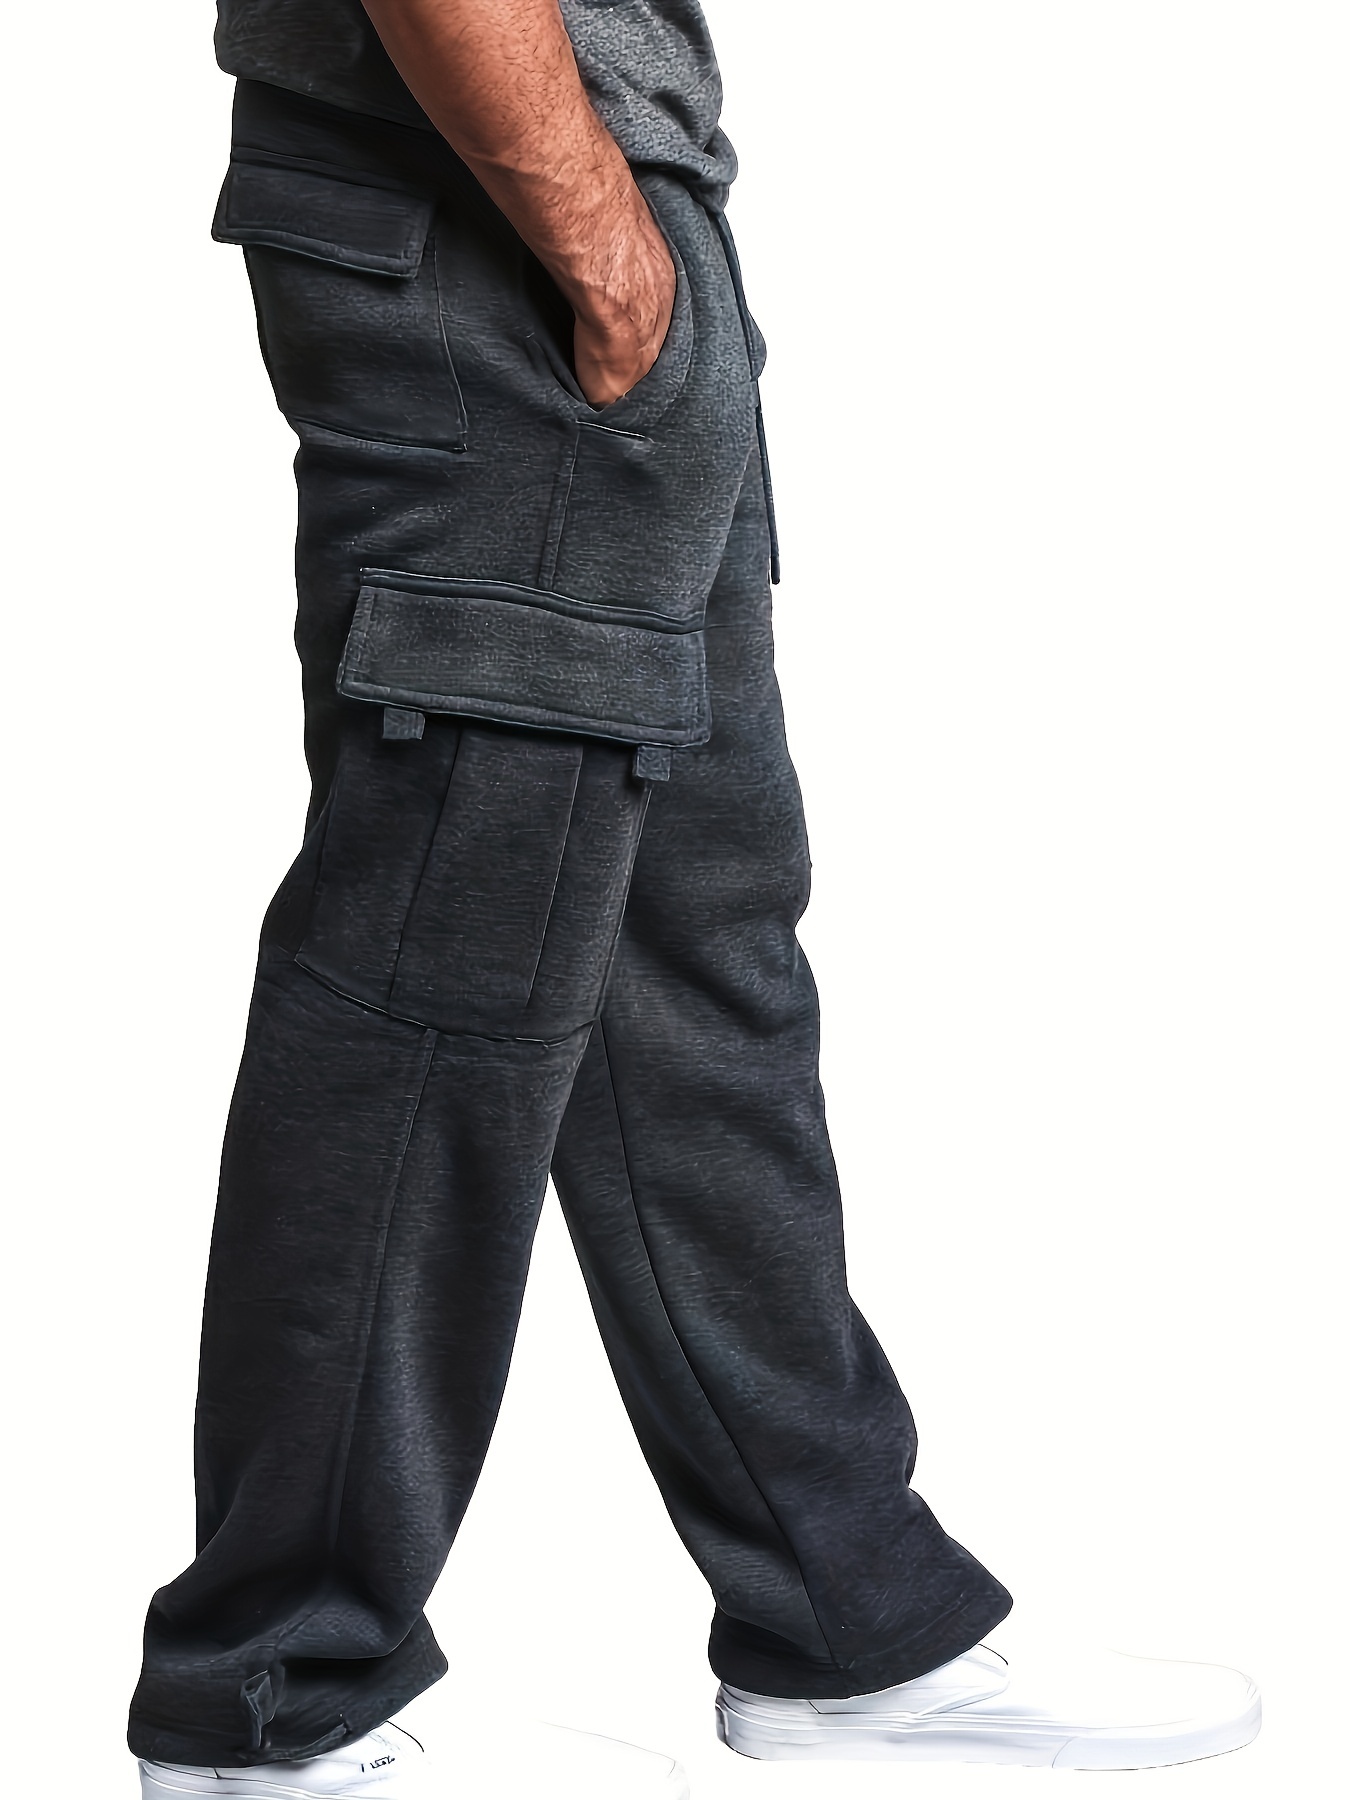 Jogging Bottoms - Comfy Trousers